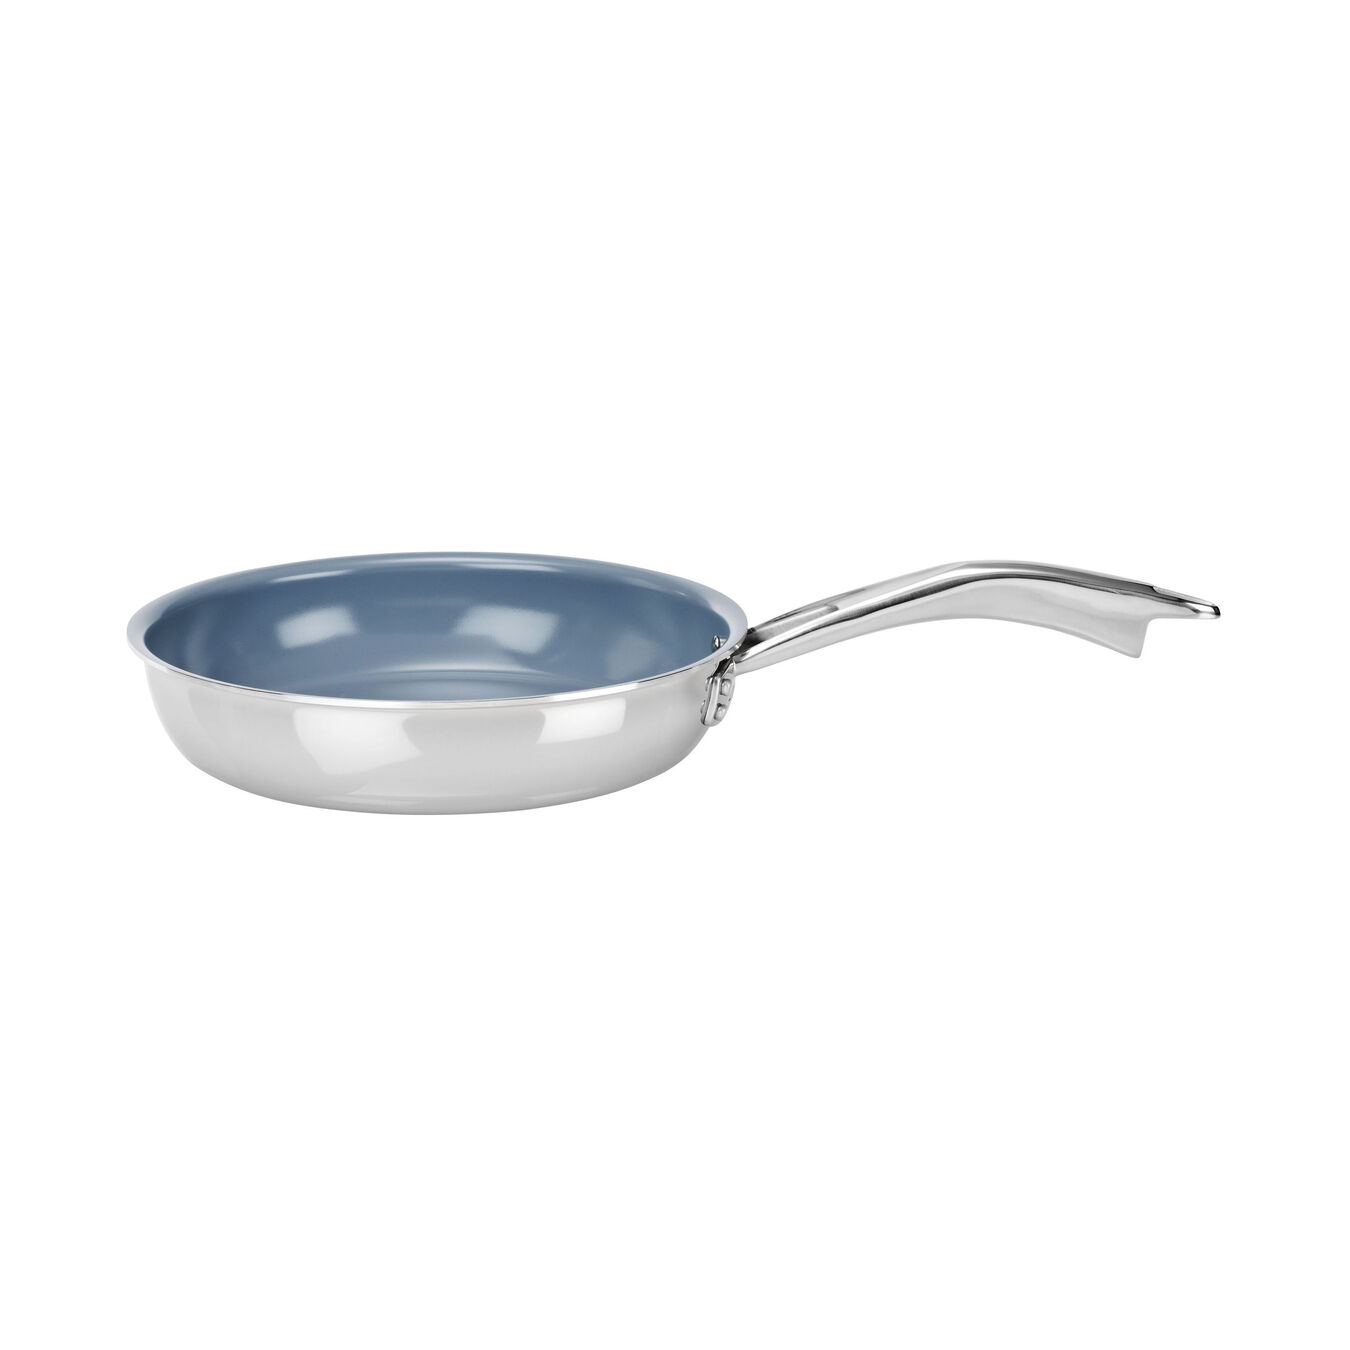 30 cm / 12 inch 18/10 Stainless Steel Frying pan,,large 1